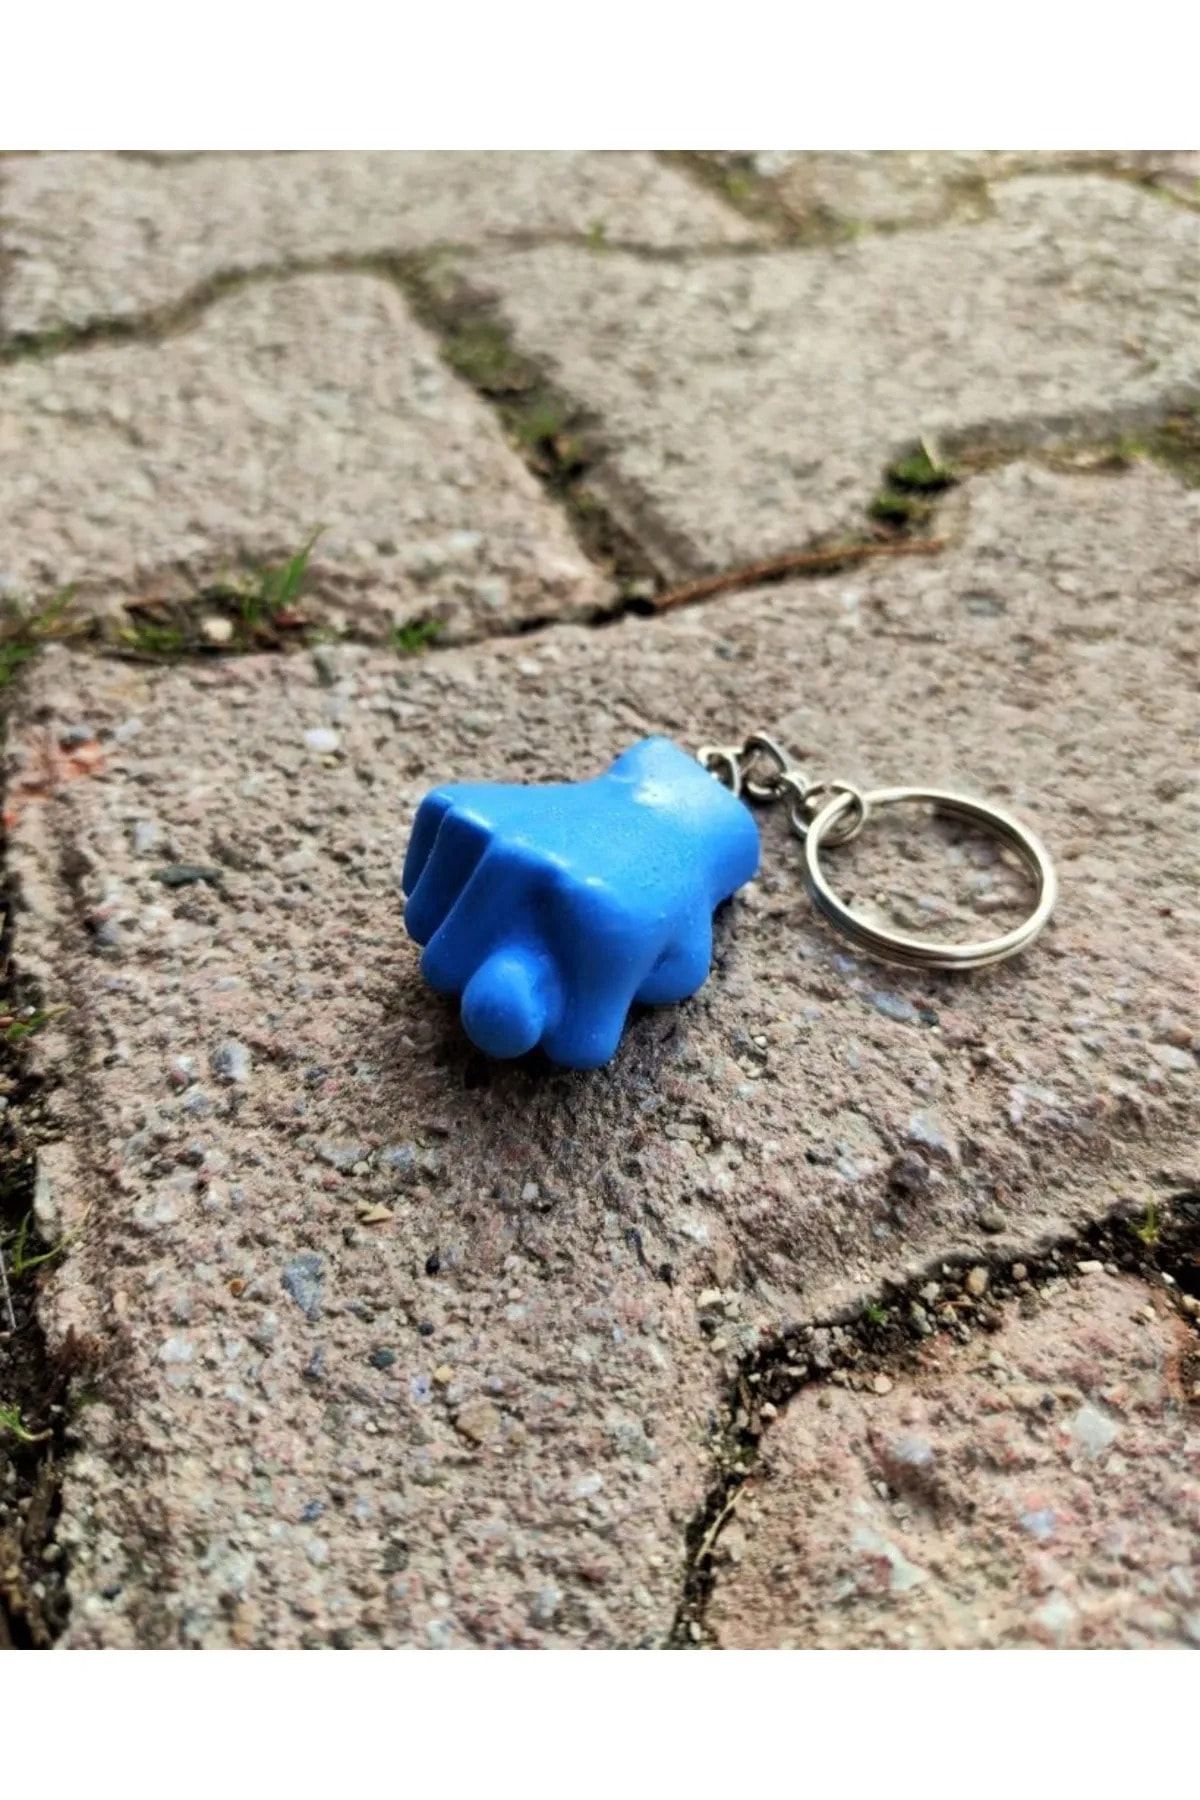 3D Printed FORD Keychain Keyring 3D Printing Cars Cars Keys Dimensional  Designs Small Gifts Ford Accessories - Etsy